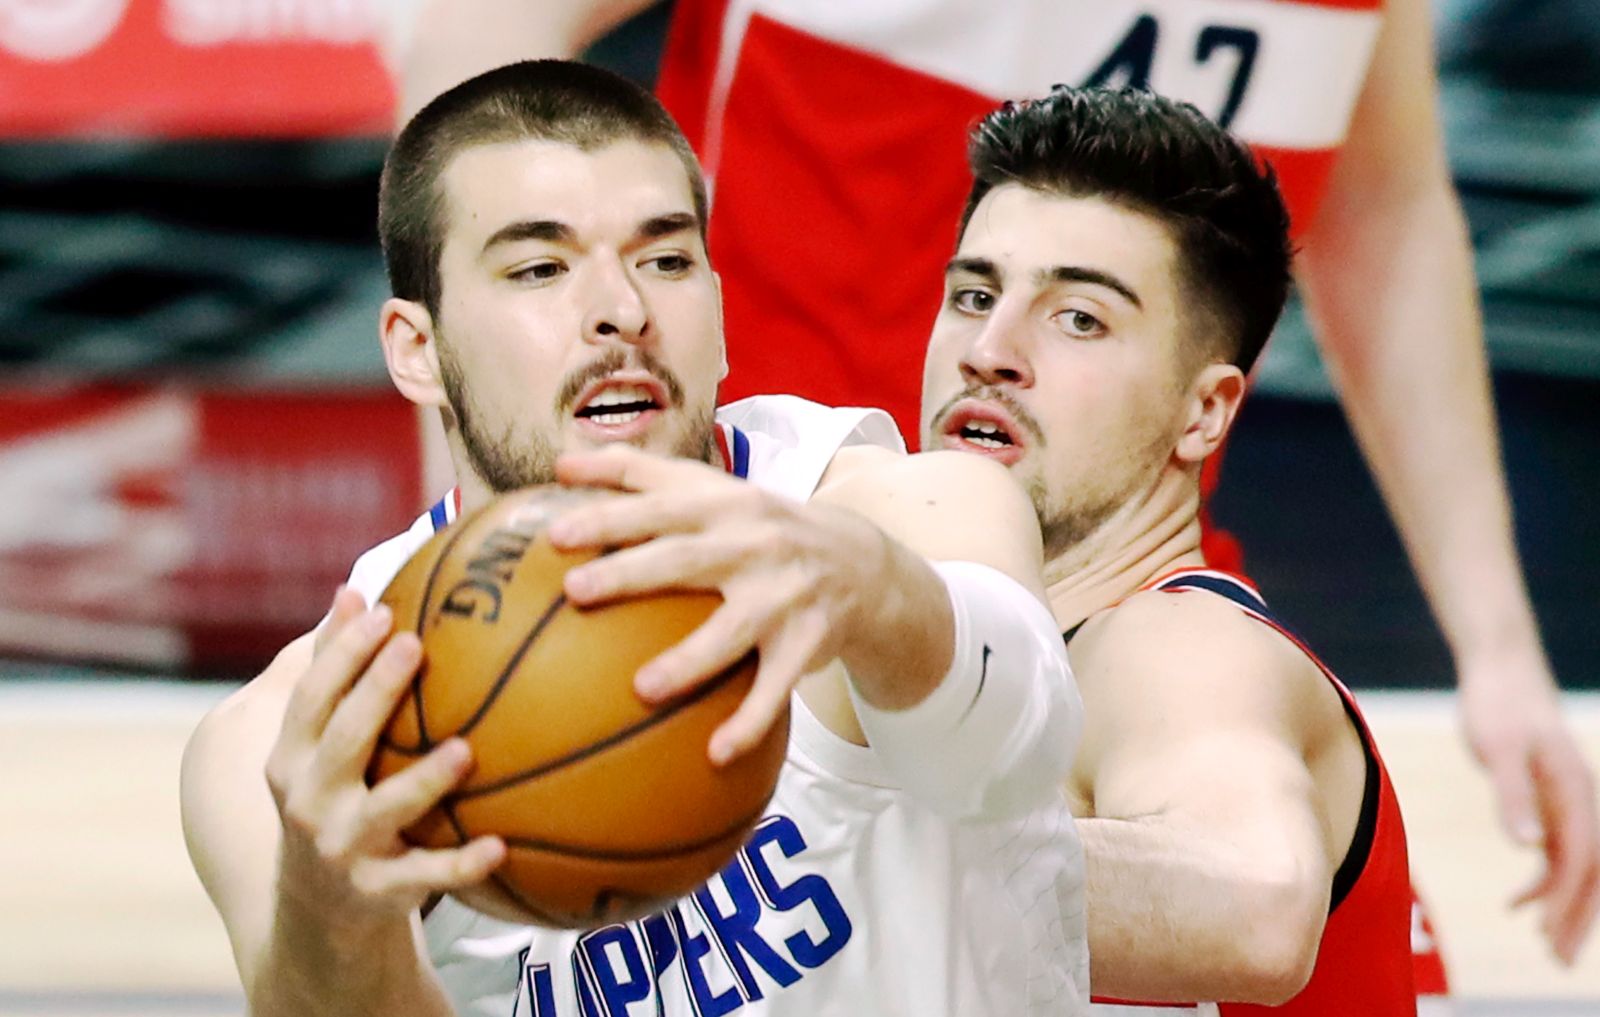 epa09033017 Los Angeles Clippers center Ivica Zubac (L) in action against Washington Wizards guard Raul Neto (R) during the first quarter of the NBA basketball game between the Washington Wizards and the Los Angeles Clippers at the Staples Center in Los Angeles, California, USA, 23 February 2021.  EPA/ETIENNE LAURENT SHUTTERSTOCK OUT